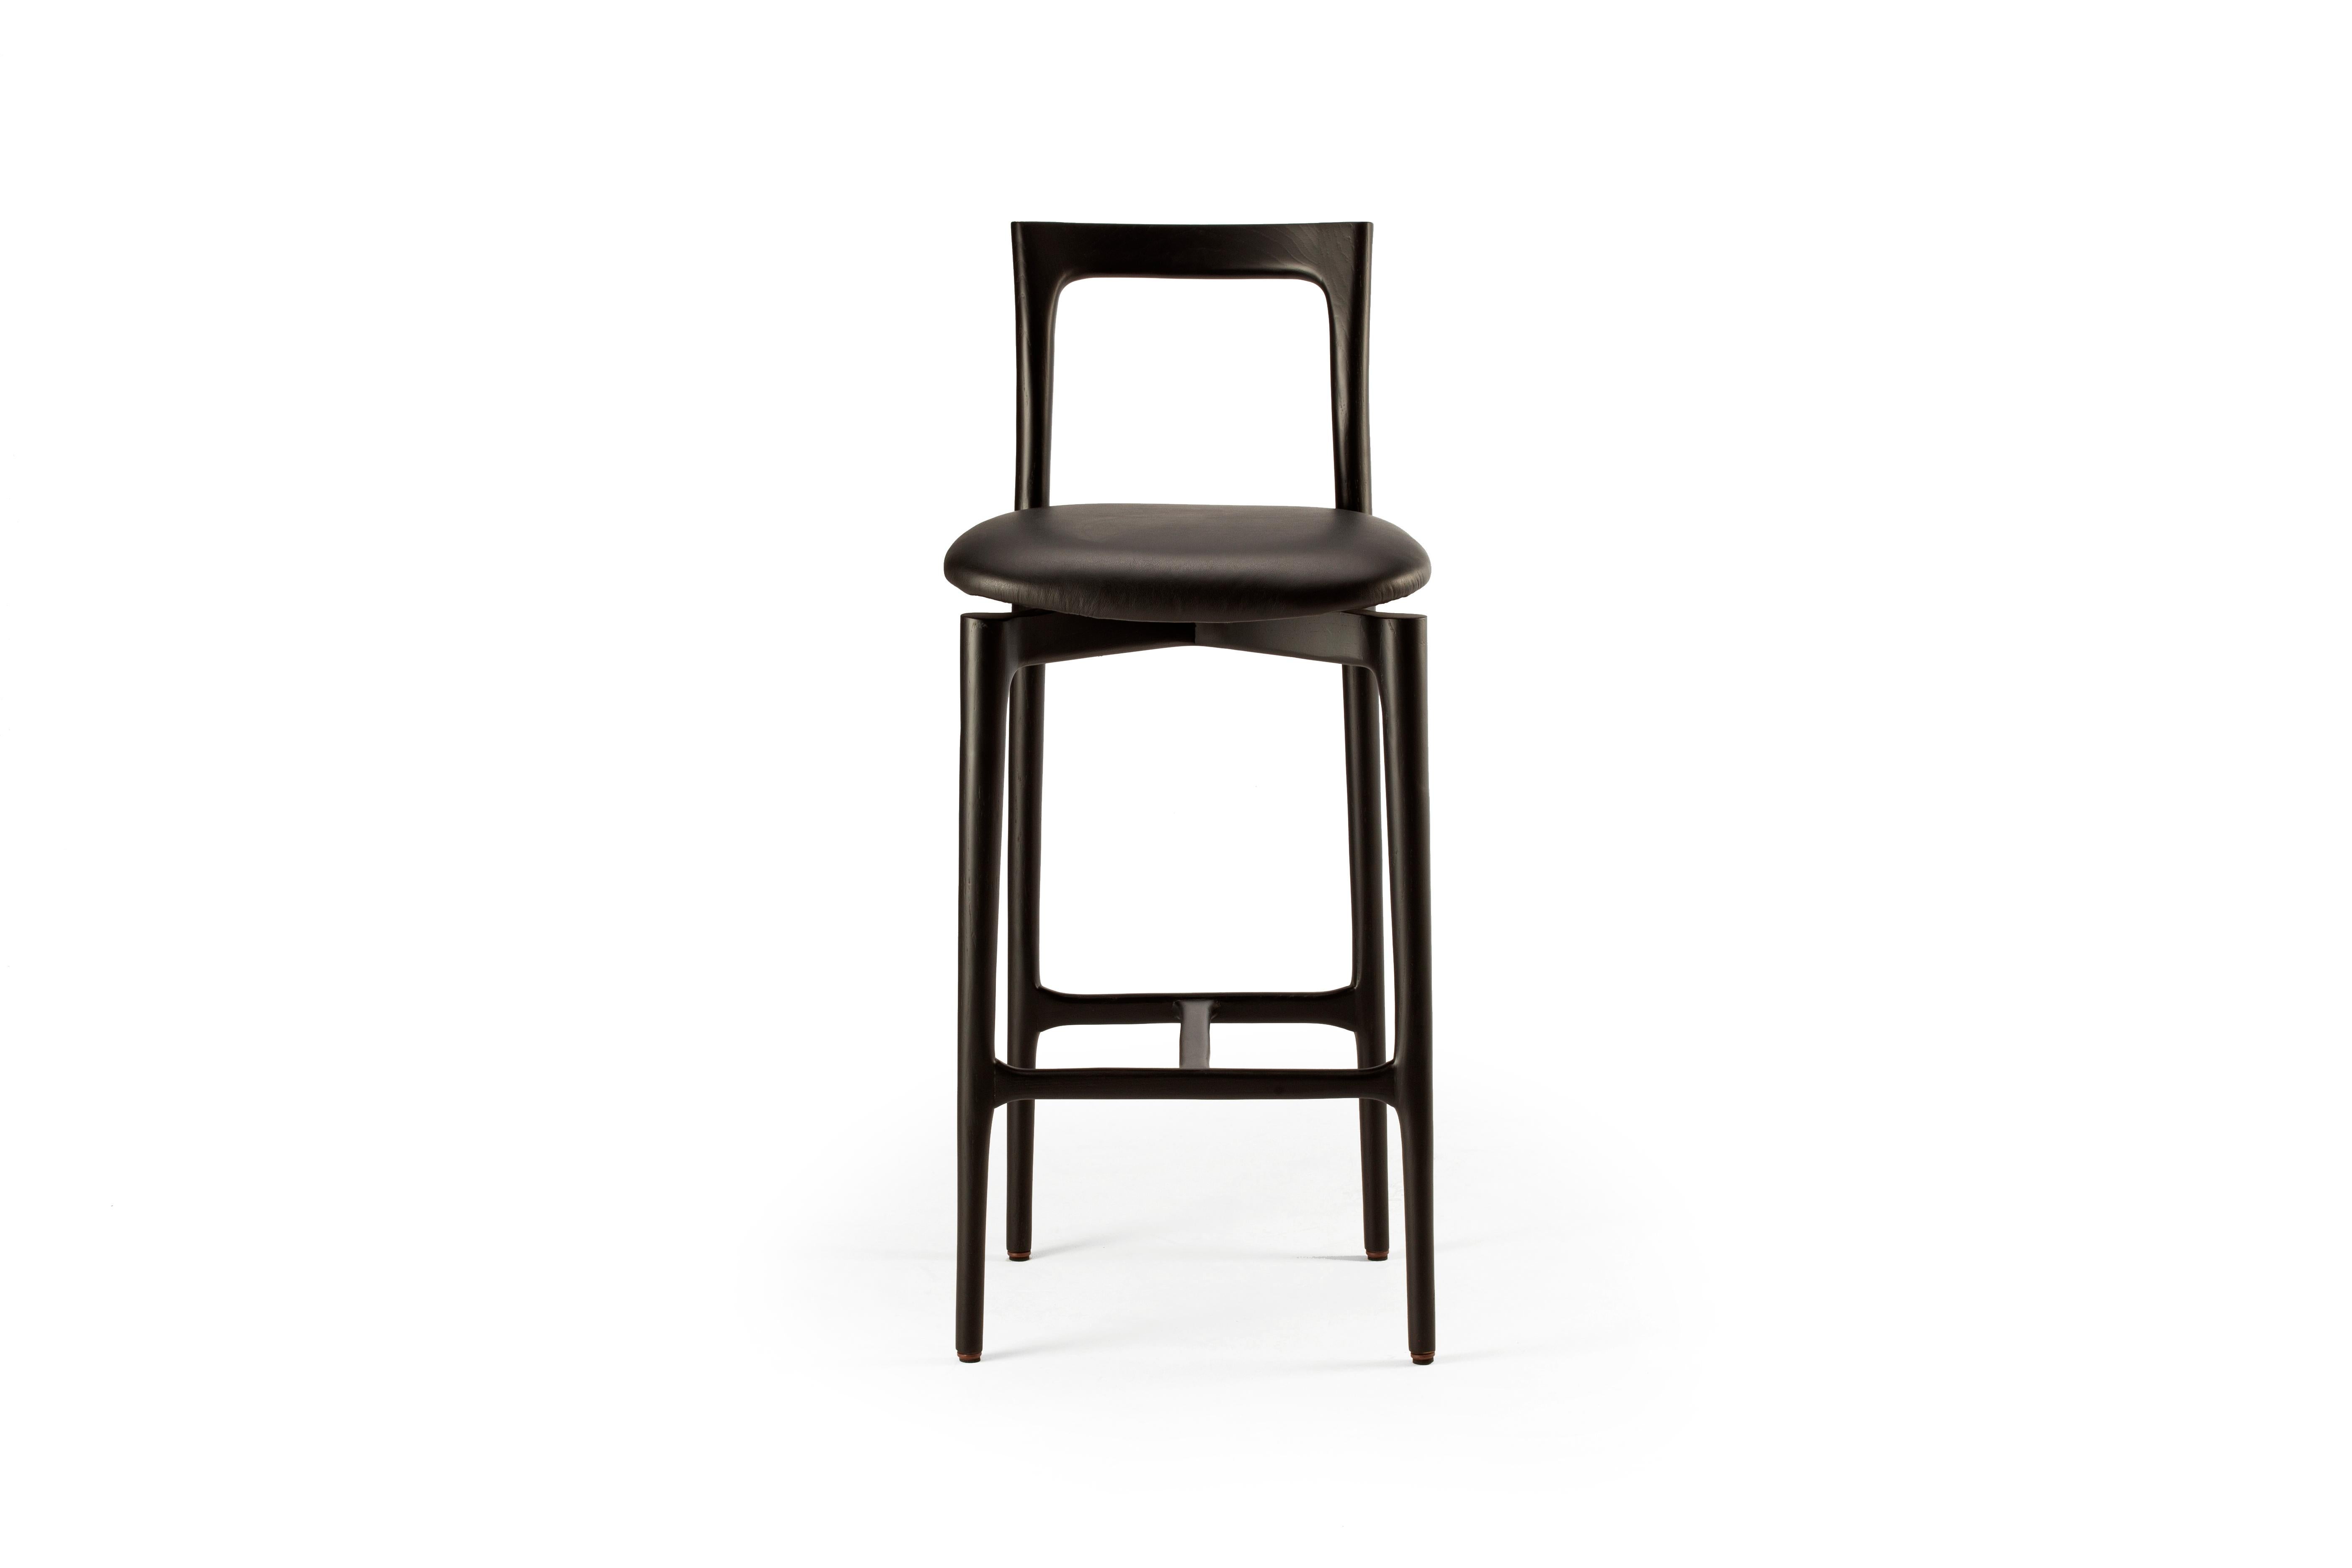 21st Century Designed by Collector Studio Grey Bar Chair Leather

With a light solid wood structure, this bar chair is suitable for contemporary interiors, the bar chair’s proportions and reduction of material provides significant special advantages